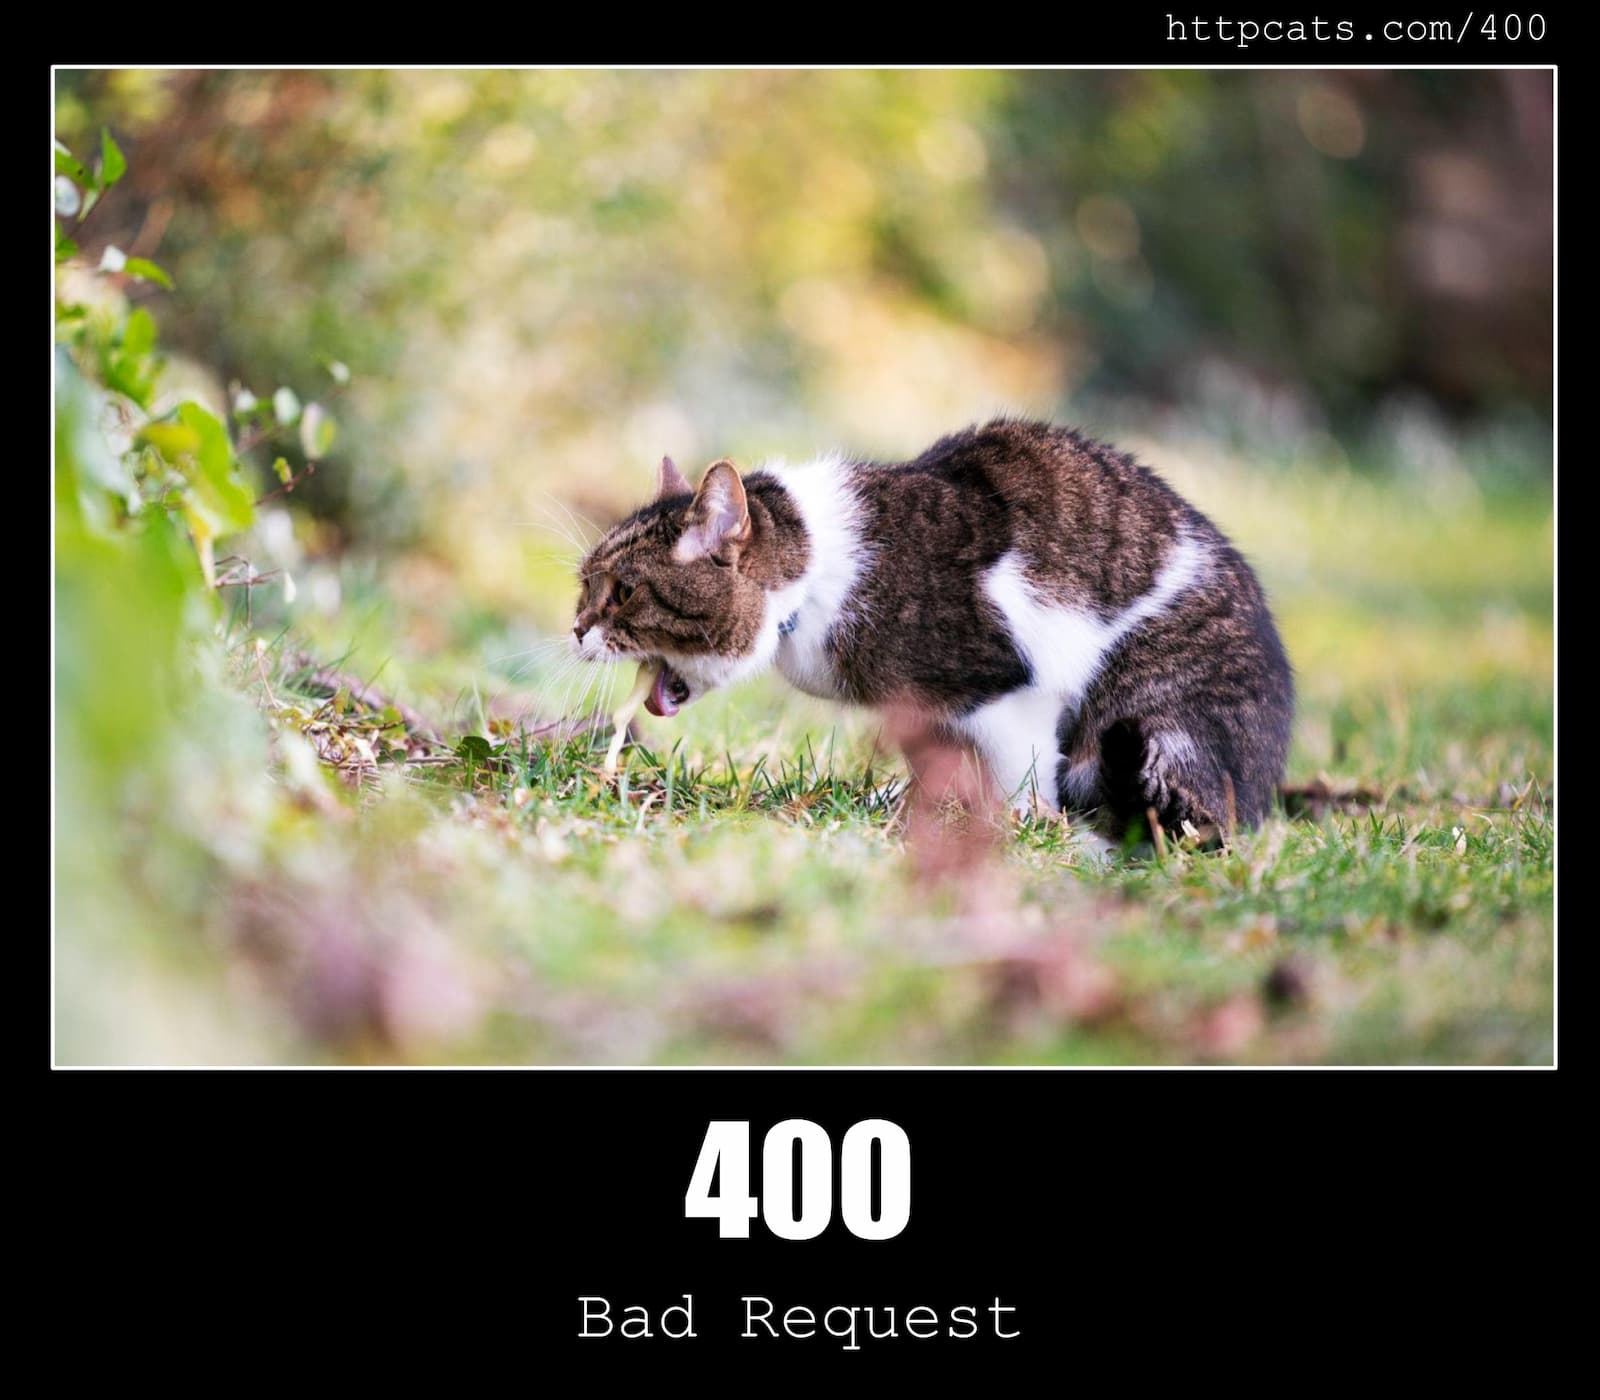 HTTP Status Code 400 Bad Request & Cats